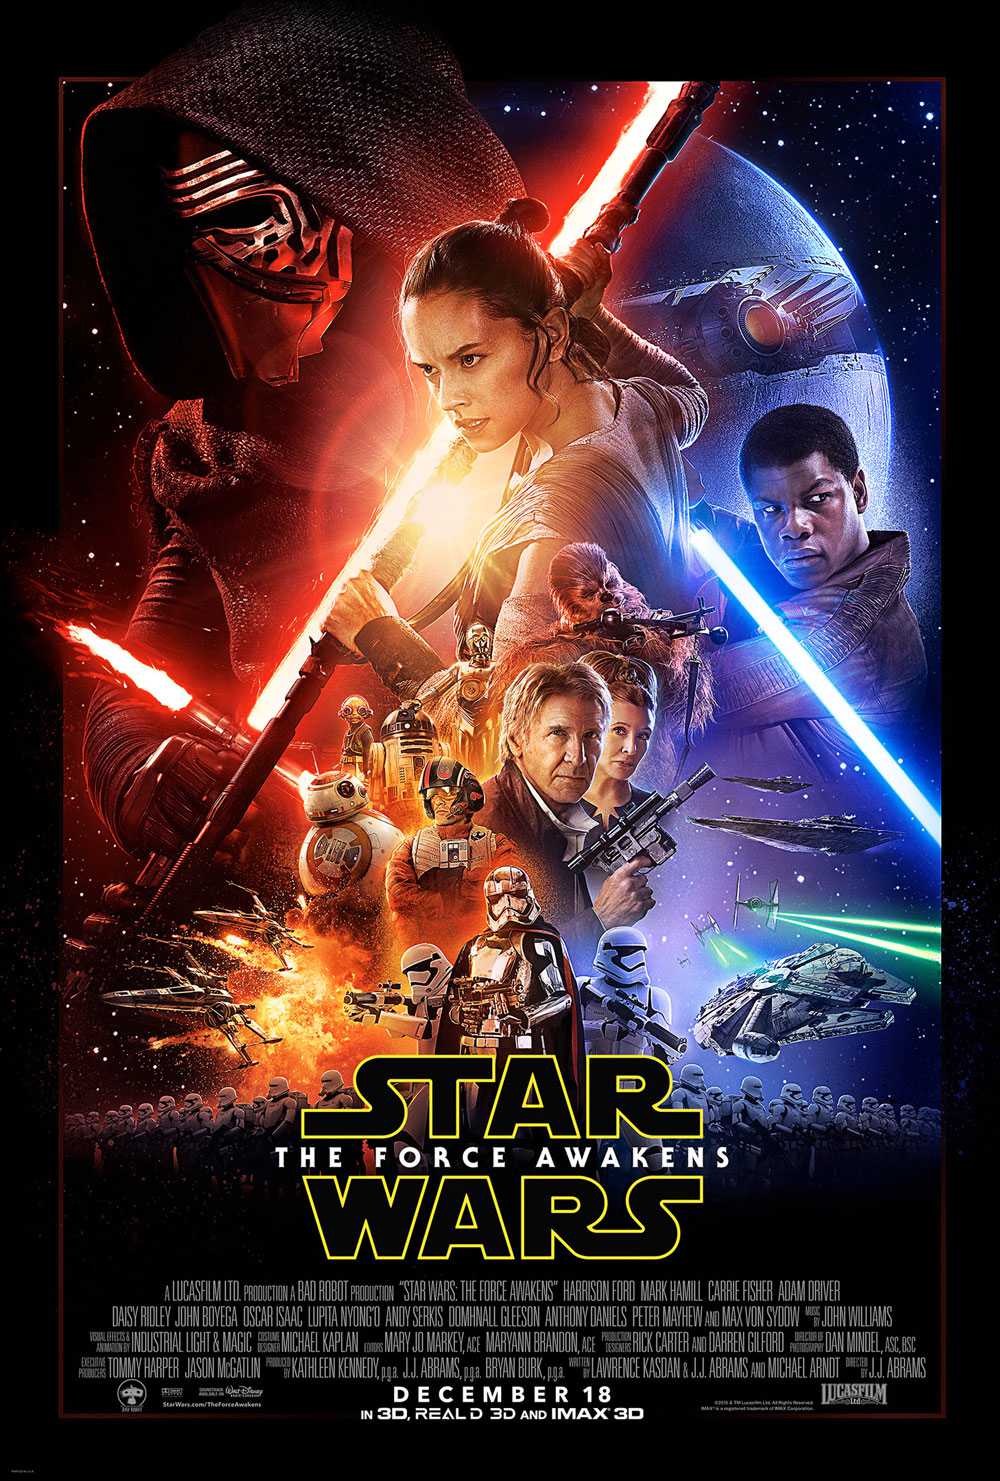 You are currently viewing Notes On A Film – Star Wars: The Force Awakens